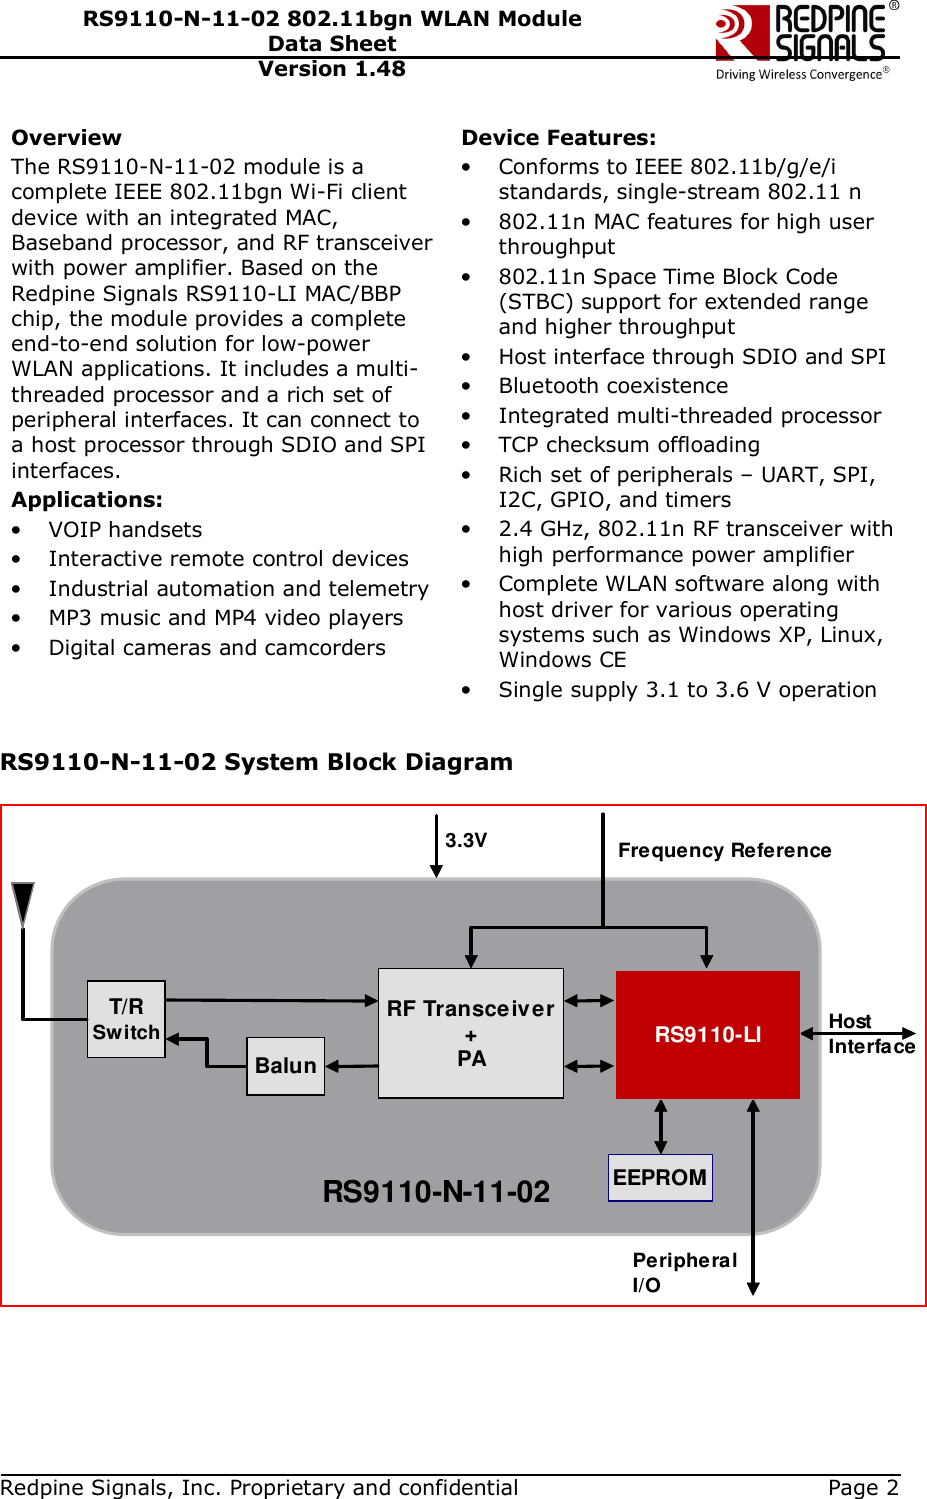   Redpine Signals, Inc. Proprietary and confidential  Page 2 RS9110-N-11-02 802.11bgn WLAN Module Data Sheet Version 1.48 Overview The RS9110-N-11-02 module is a complete IEEE 802.11bgn Wi-Fi client device with an integrated MAC, Baseband processor, and RF transceiver with power amplifier. Based on the Redpine Signals RS9110-LI MAC/BBP chip, the module provides a complete end-to-end solution for low-power WLAN applications. It includes a multi-threaded processor and a rich set of peripheral interfaces. It can connect to a host processor through SDIO and SPI interfaces. Applications: • VOIP handsets • Interactive remote control devices • Industrial automation and telemetry • MP3 music and MP4 video players • Digital cameras and camcorders   Device Features: • Conforms to IEEE 802.11b/g/e/i standards, single-stream 802.11 n • 802.11n MAC features for high user throughput • 802.11n Space Time Block Code (STBC) support for extended range and higher throughput • Host interface through SDIO and SPI  • Bluetooth coexistence • Integrated multi-threaded processor • TCP checksum offloading • Rich set of peripherals – UART, SPI, I2C, GPIO, and timers • 2.4 GHz, 802.11n RF transceiver with high performance power amplifier • Complete WLAN software along with host driver for various operating systems such as Windows XP, Linux, Windows CE  • Single supply 3.1 to 3.6 V operation  RS9110-N-11-02 System Block Diagram  RS9110-N-11-02RF Transceiver+PABalunEEPROMT/RSwitch HostInterface3.3VPeripheralI/OFrequency ReferenceRS9110-LI 